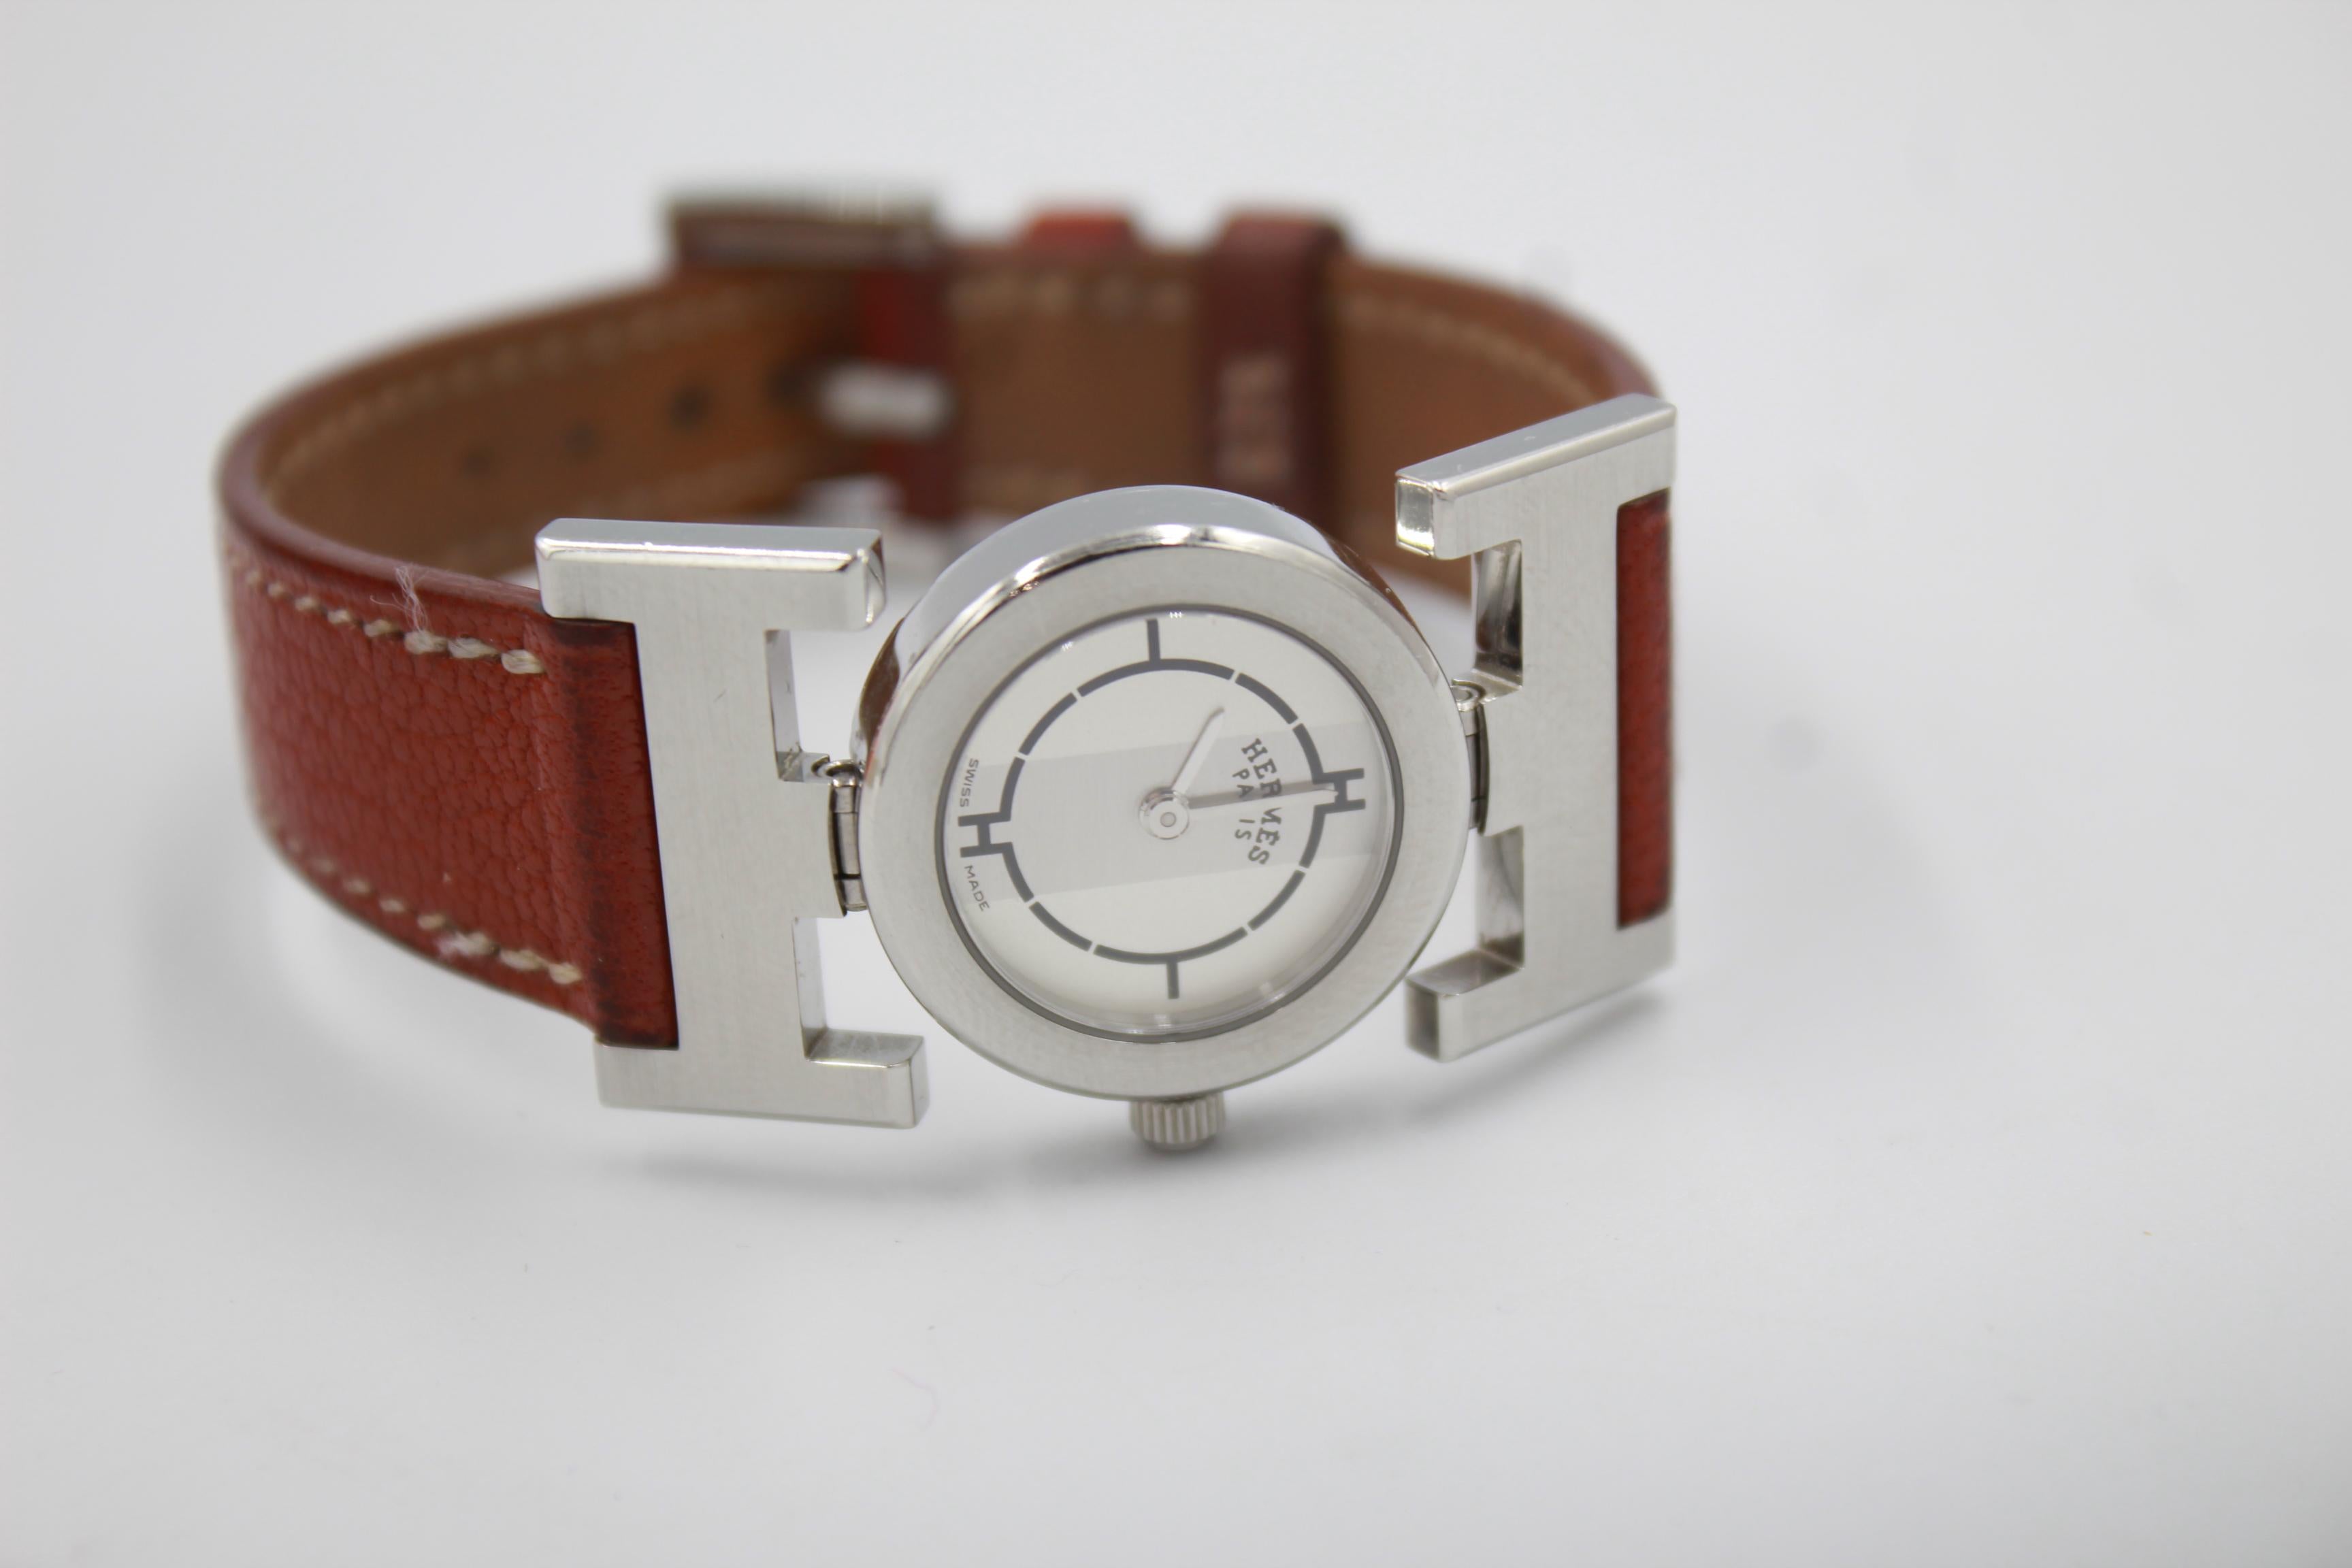 Hermès Paprika watch with a brown leather strap.
Good condition.
sold with its box.